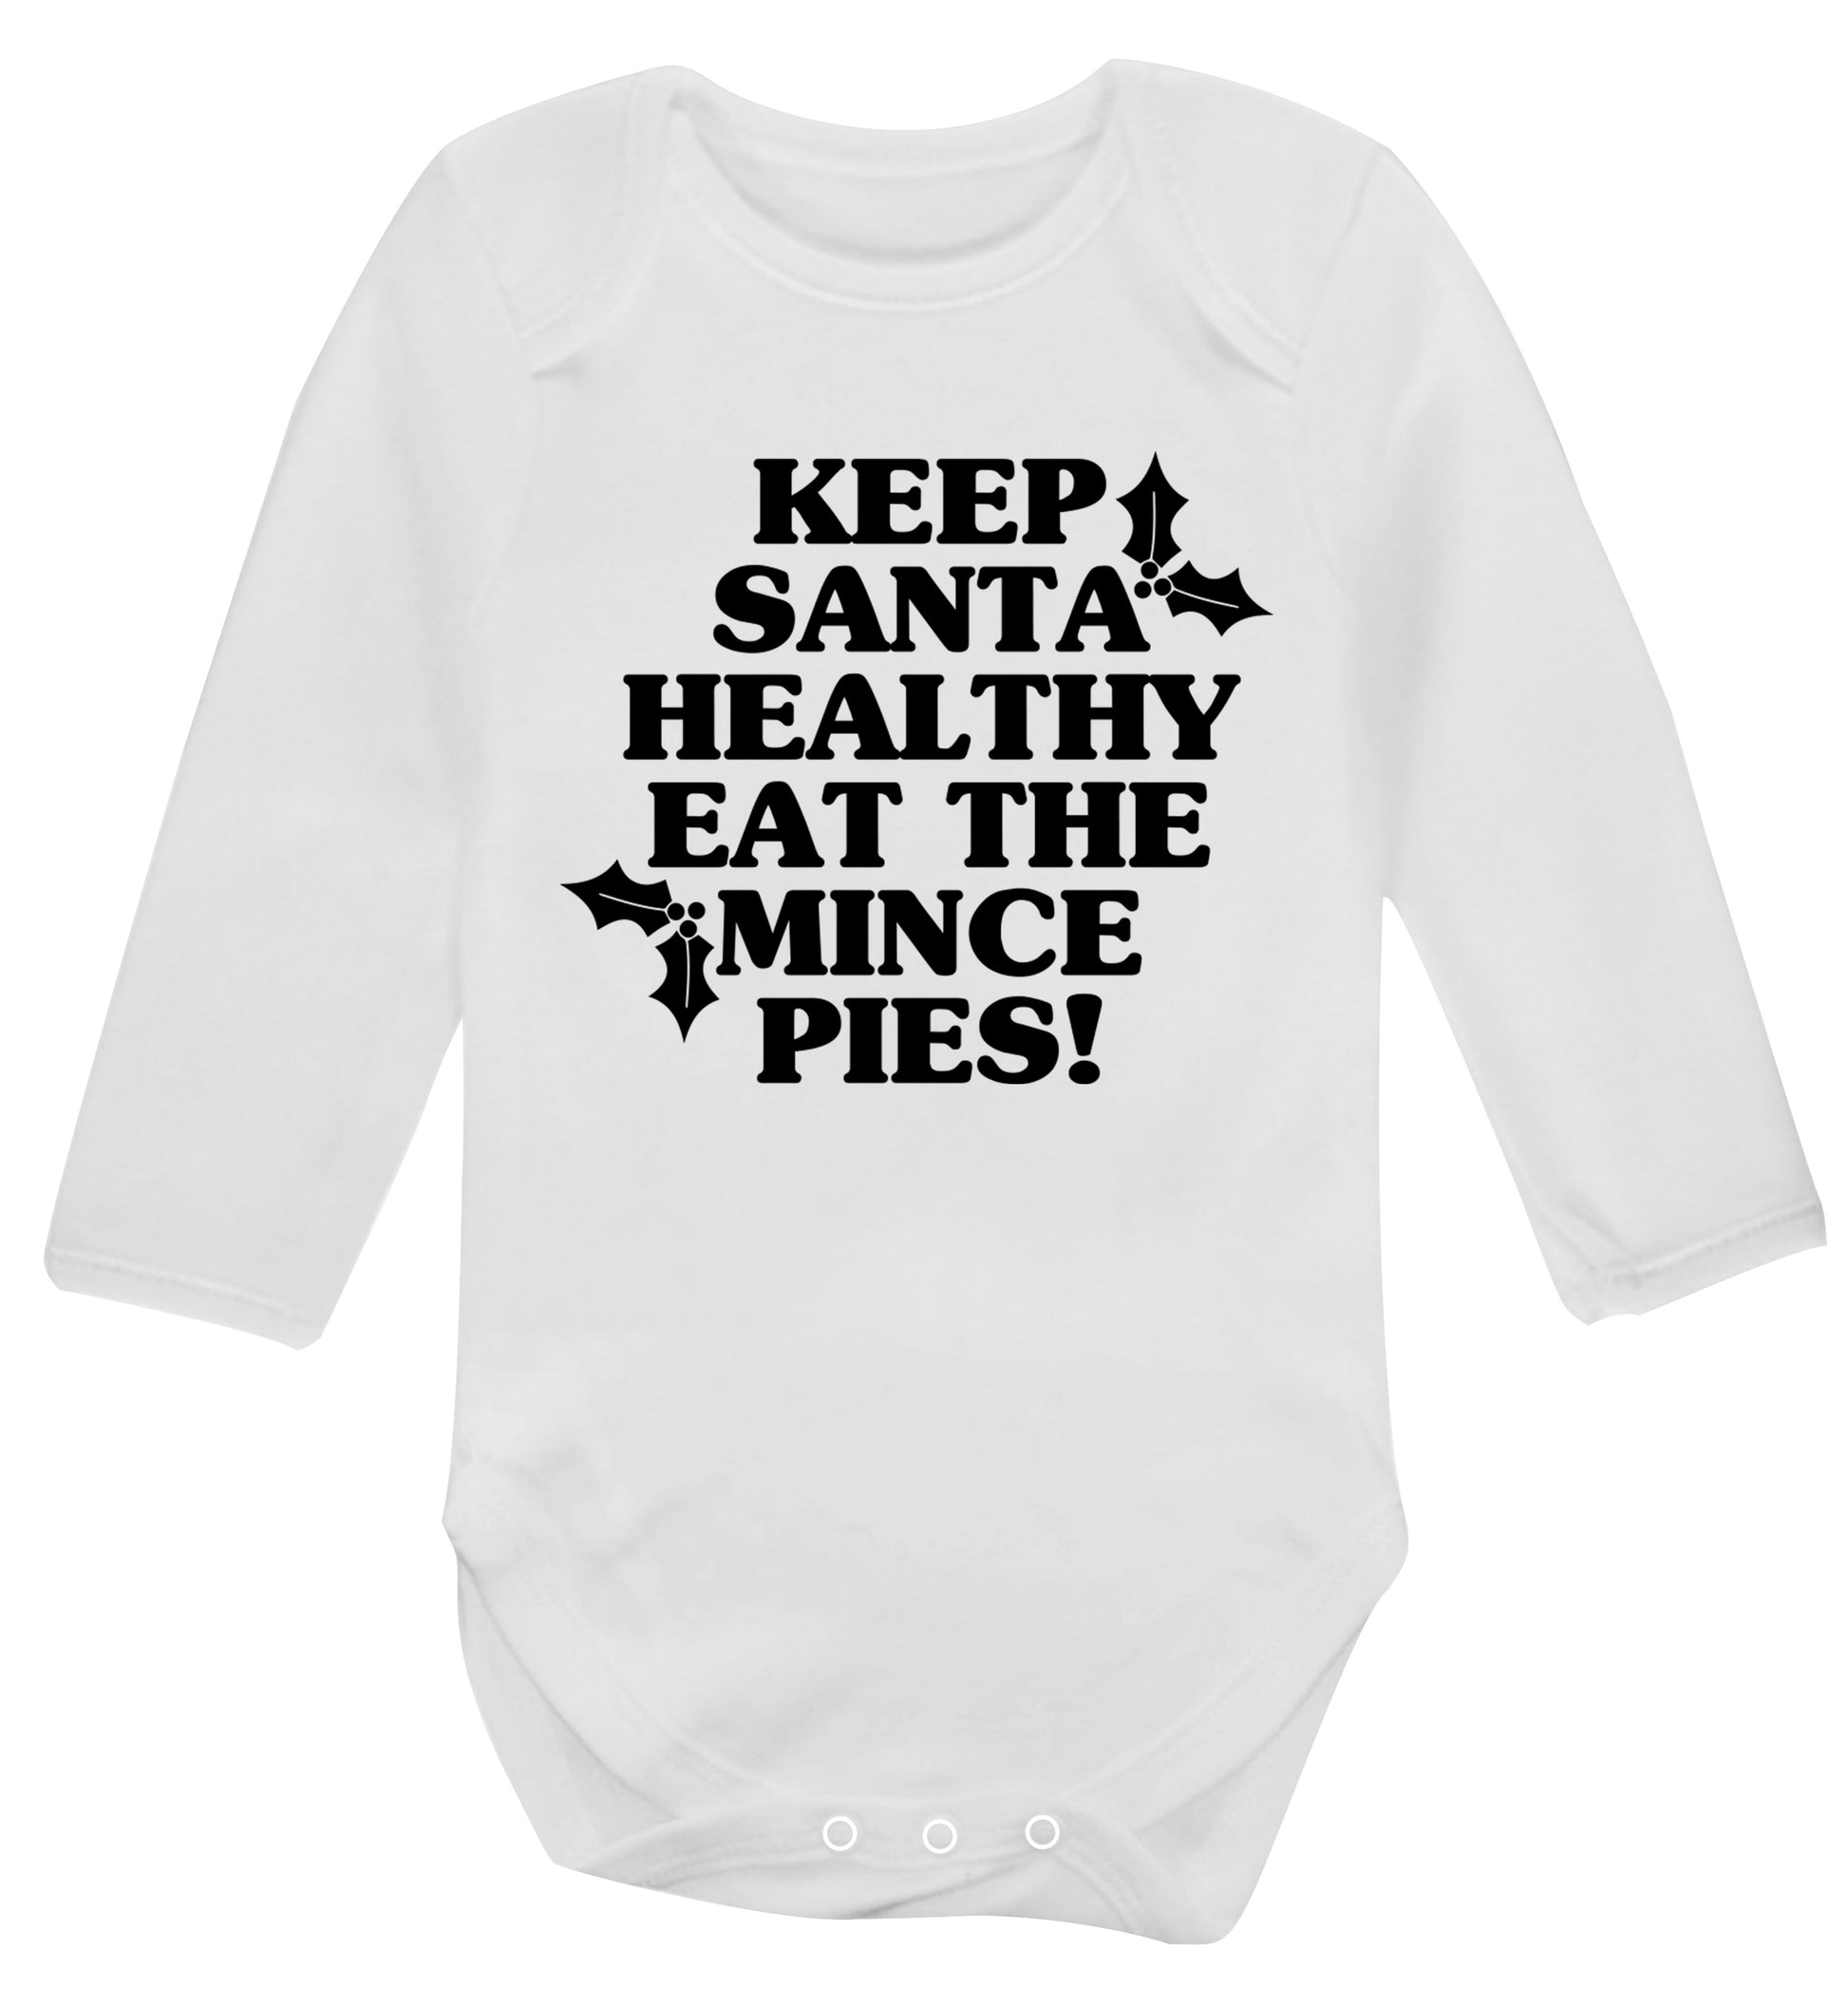 Keep santa healthy eat the mince pies Baby Vest long sleeved white 6-12 months